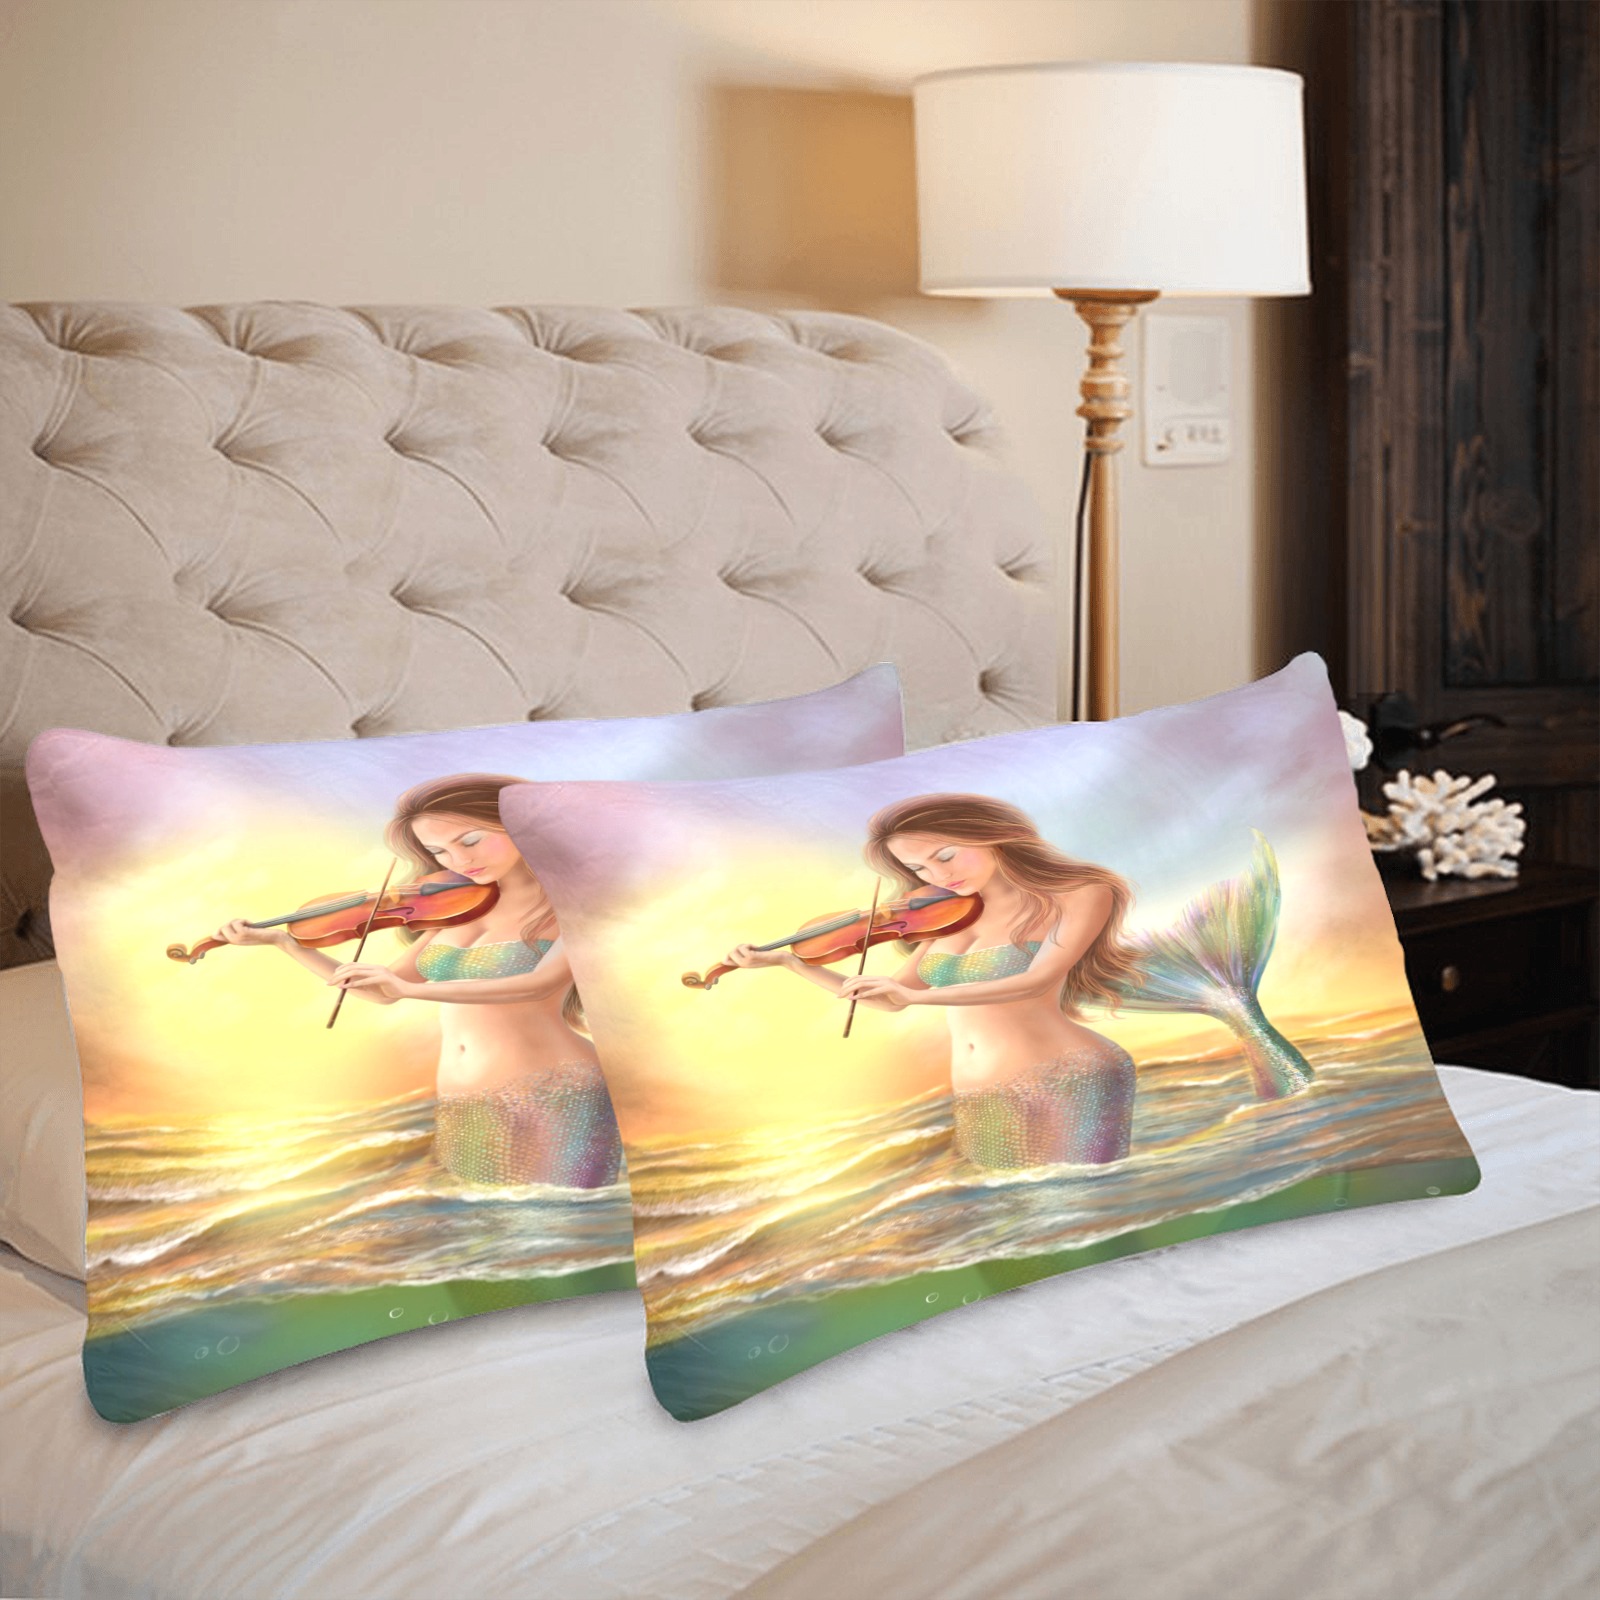 gehe55 Custom Pillow Case 20"x 30" (One Side) (Set of 2)